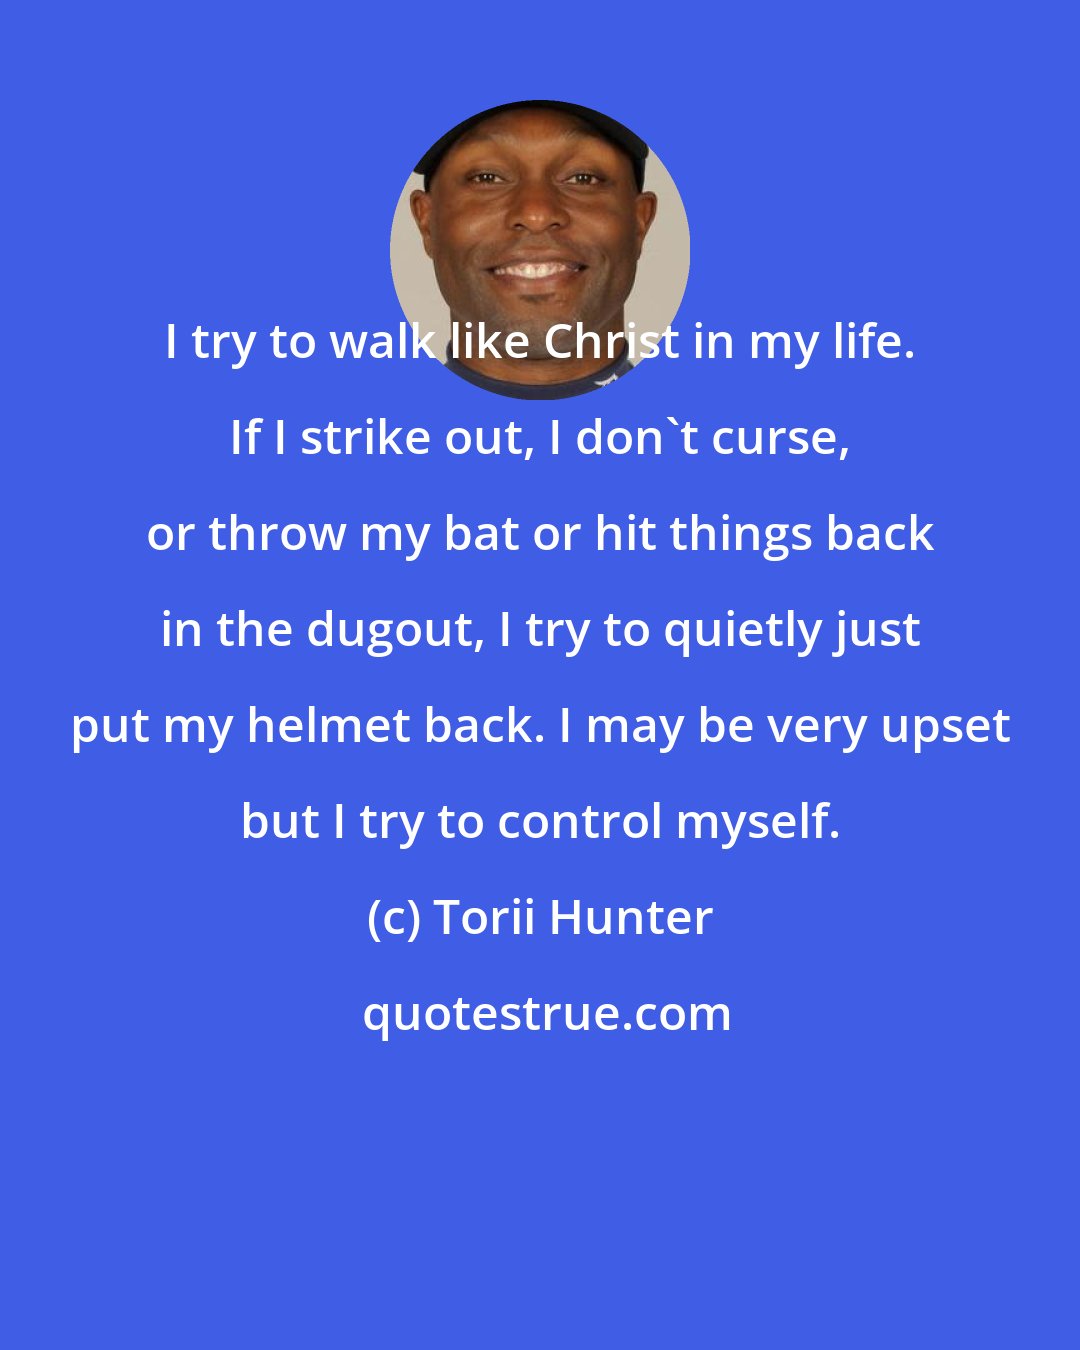 Torii Hunter: I try to walk like Christ in my life. If I strike out, I don't curse, or throw my bat or hit things back in the dugout, I try to quietly just put my helmet back. I may be very upset but I try to control myself.